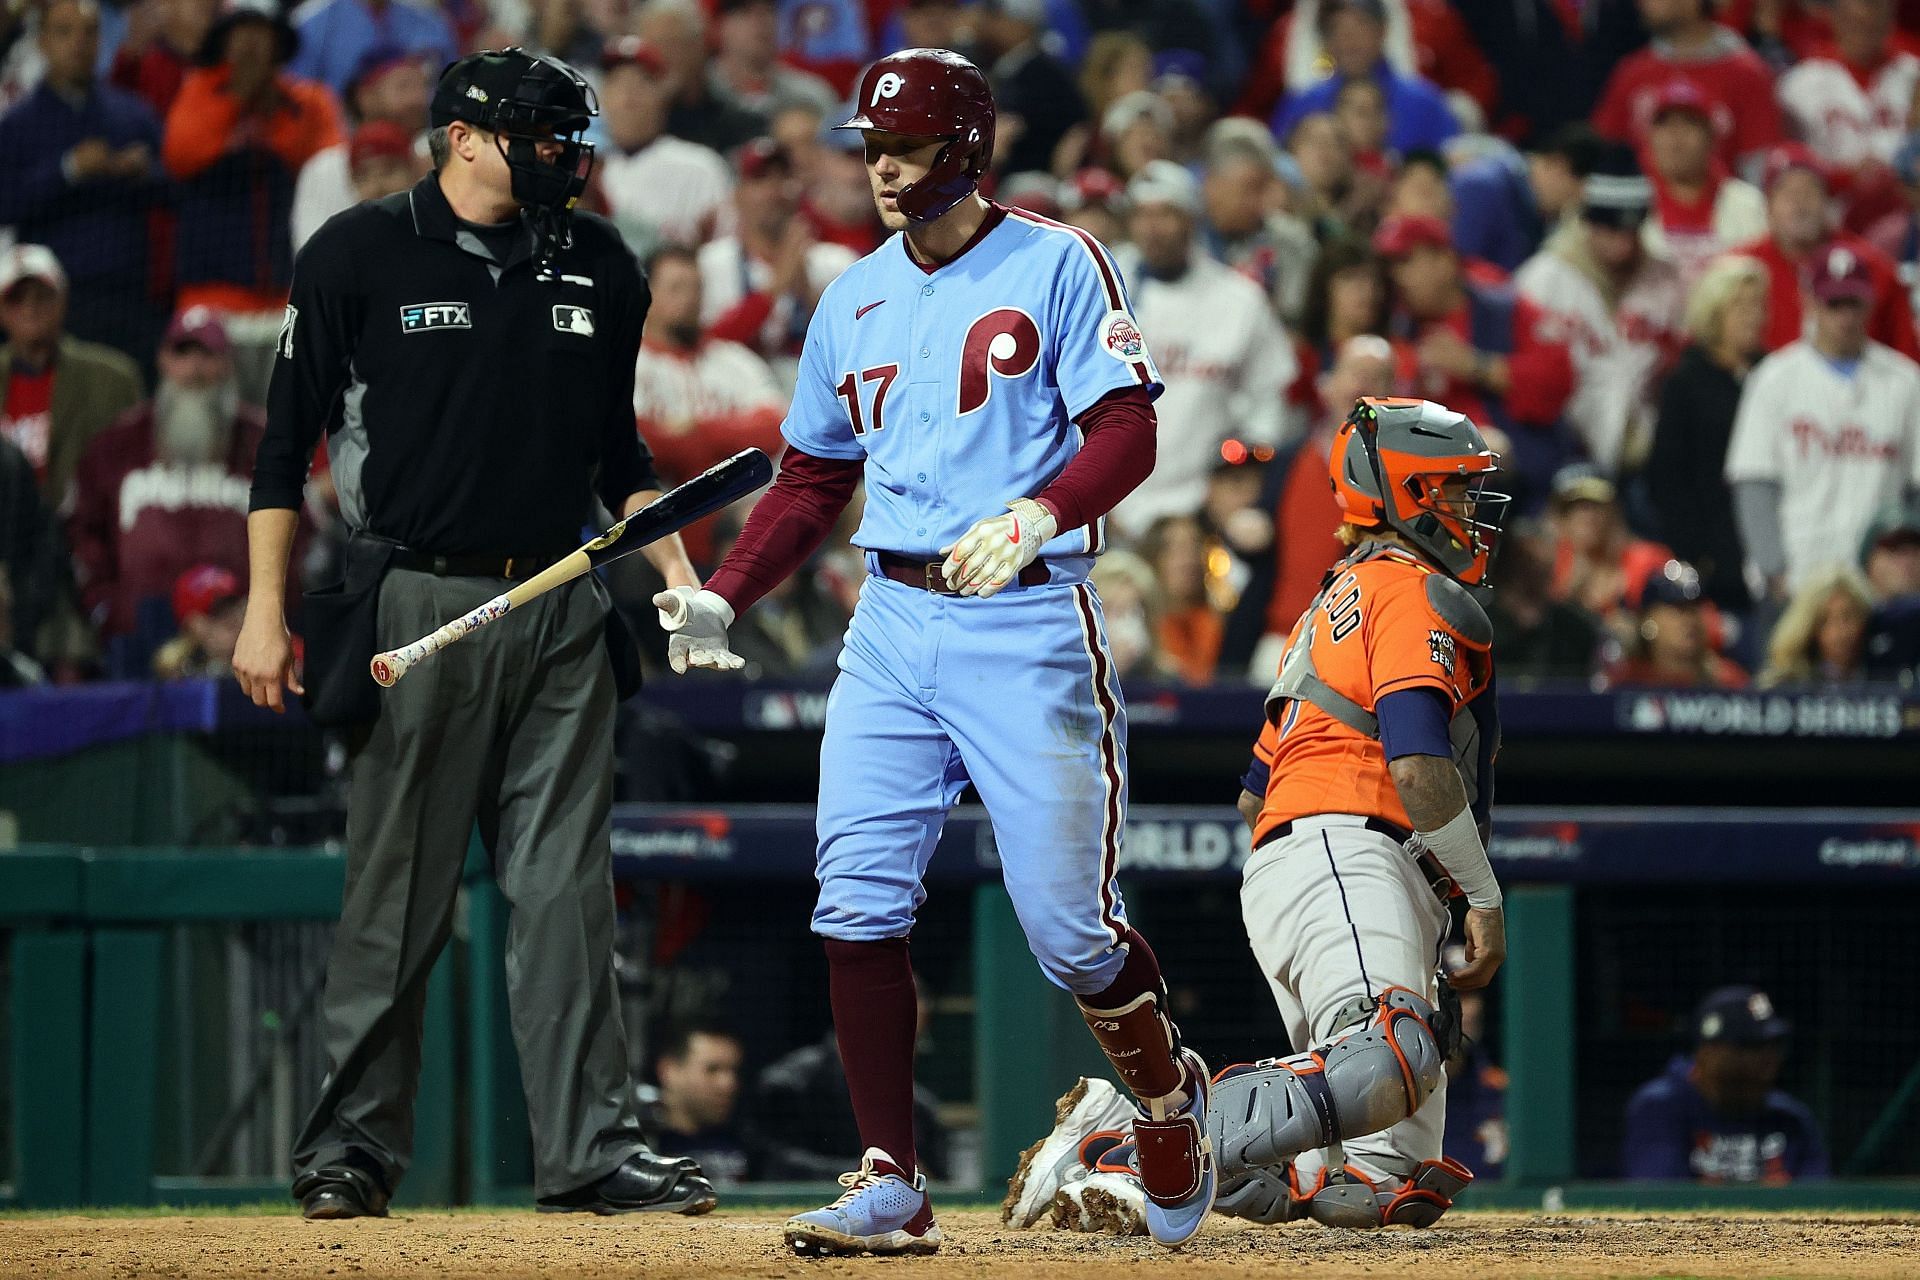 Philadelphia Phillies fans react to Rhys Hoskins being carted off the field  after knee injury: Absolutely hate this Prayers up for Rhys